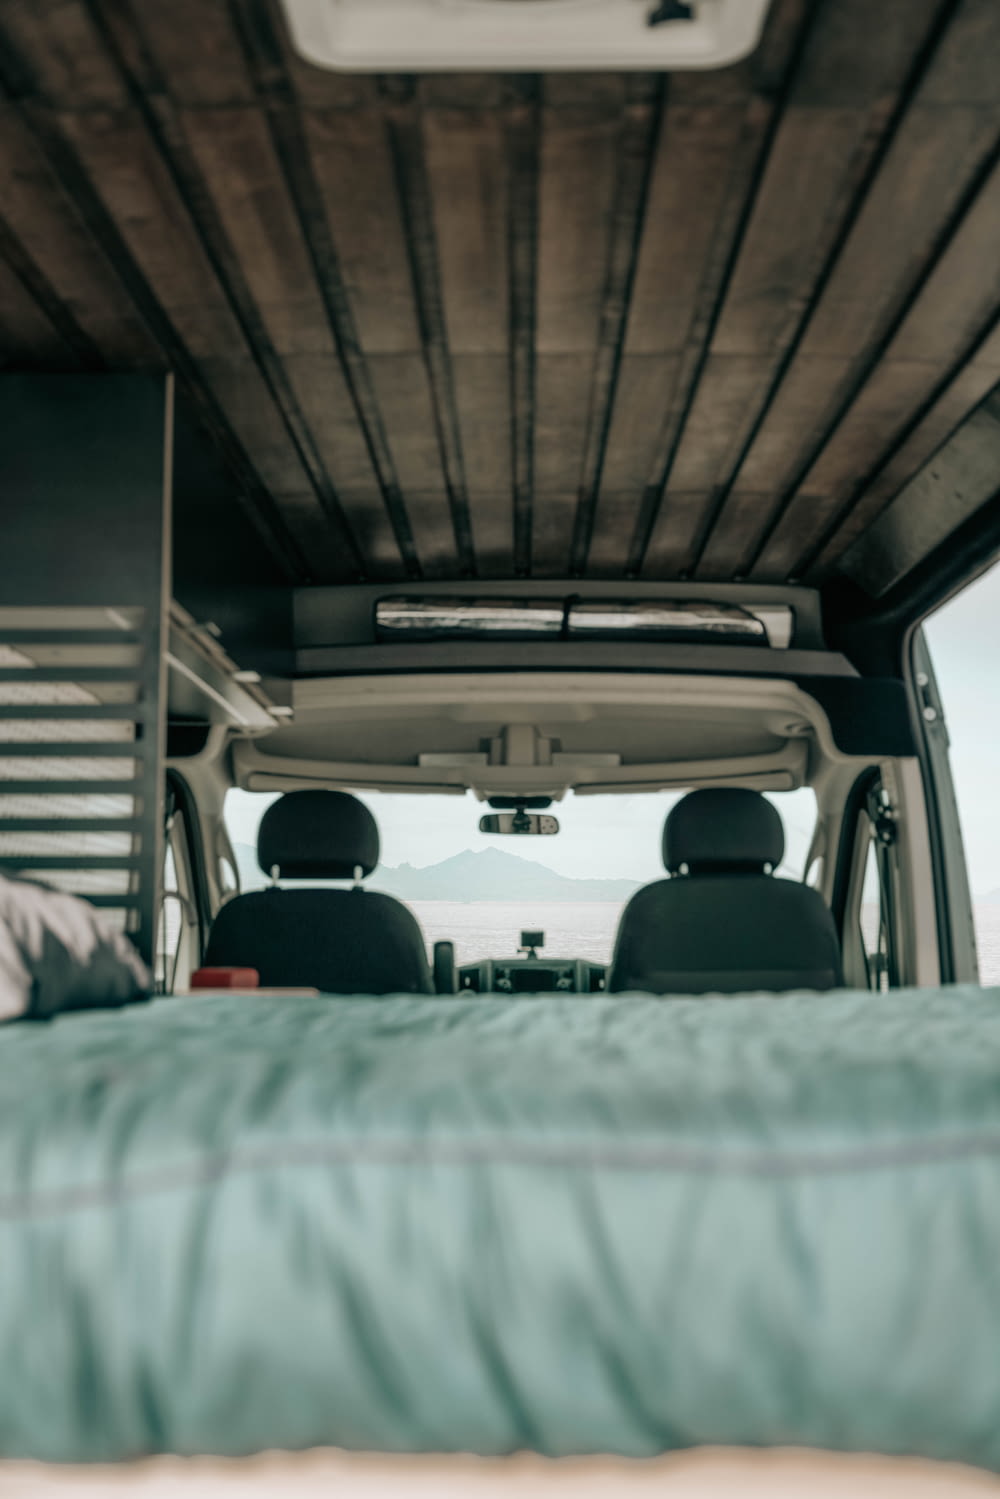 a view of the back of a van from the bed